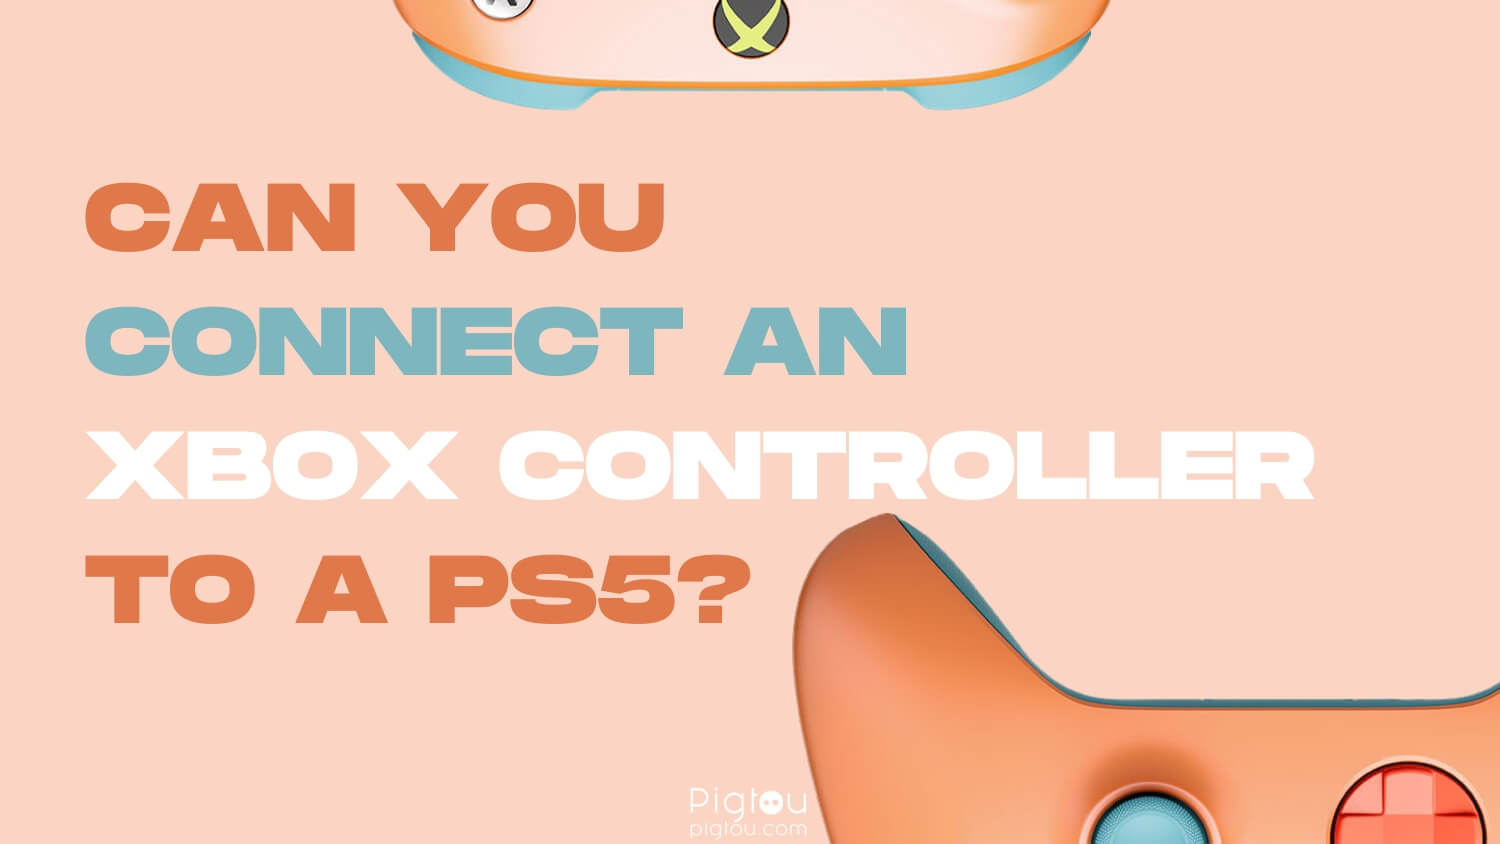 Can You Connect an Xbox Controller to a PS5